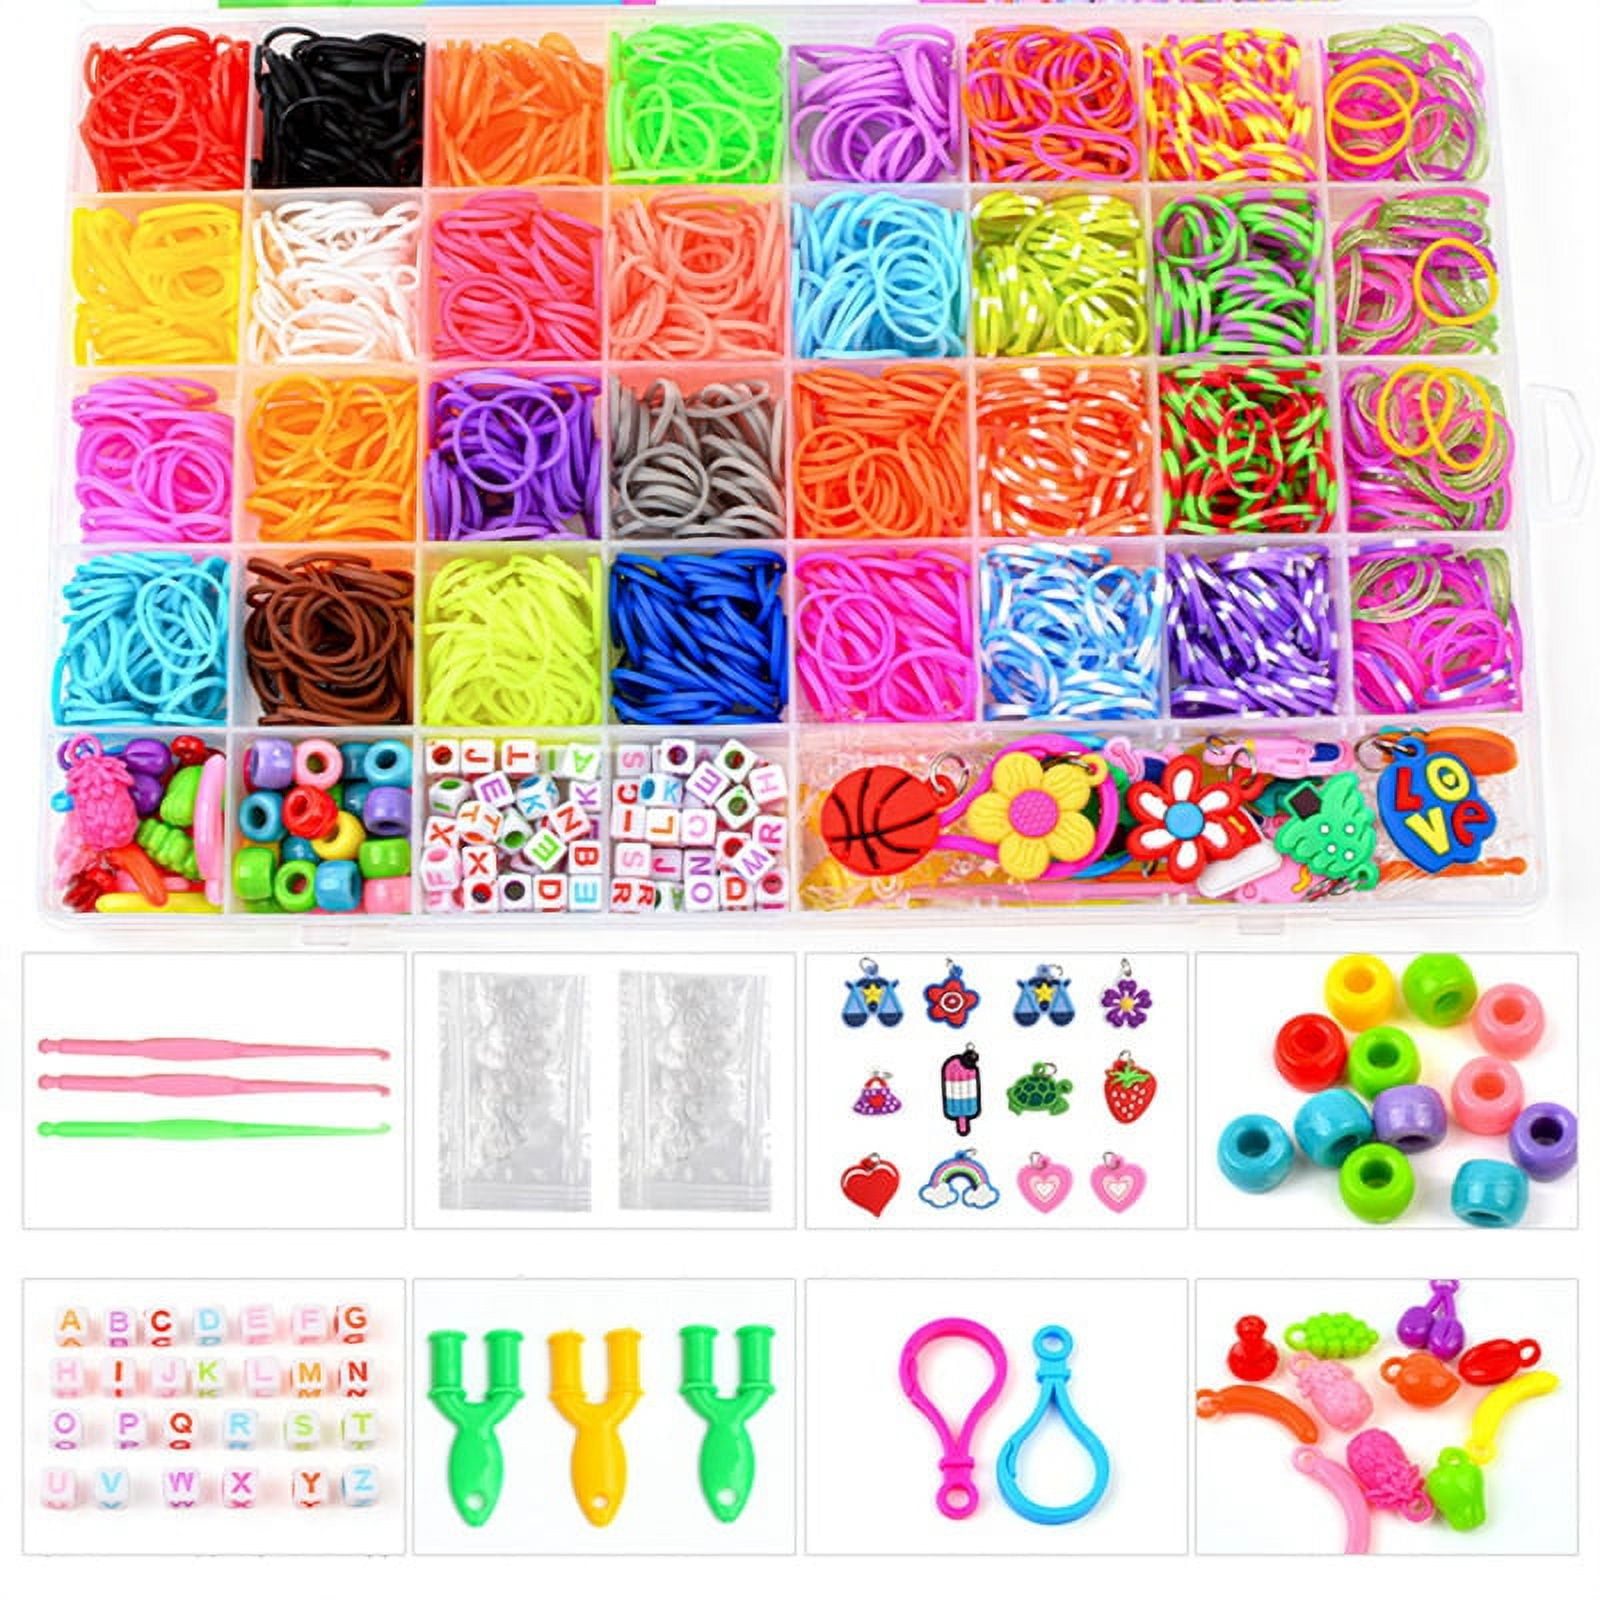 Rainbow Loom Bands (Opaque Color Mix) - A2Z Science & Learning Toy